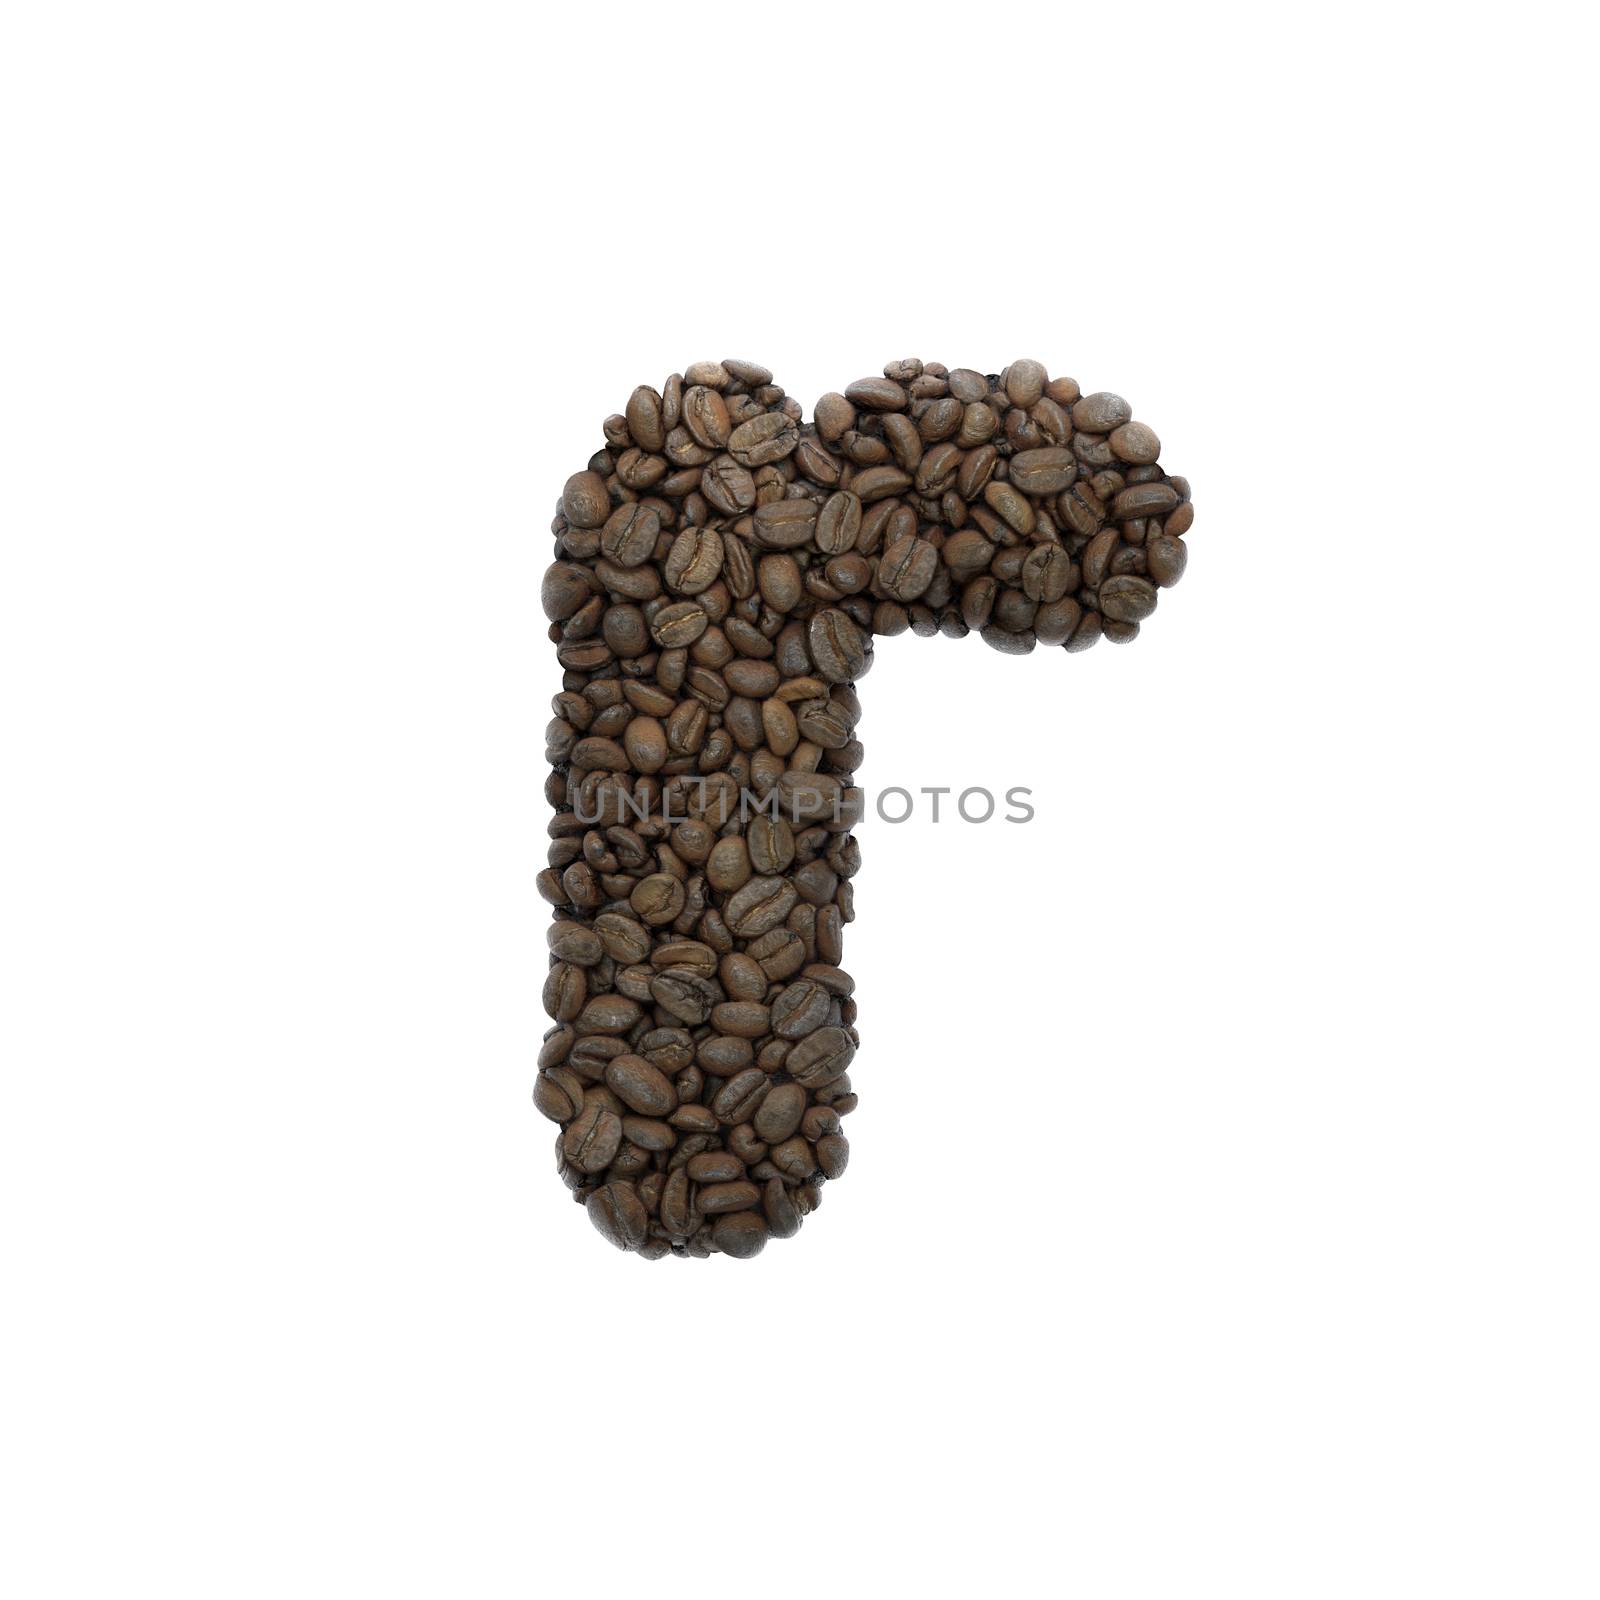 Coffee letter R - Lower-case 3d roasted beans font - Suitable for Coffee, energy or insomnia related subjects by chrisroll